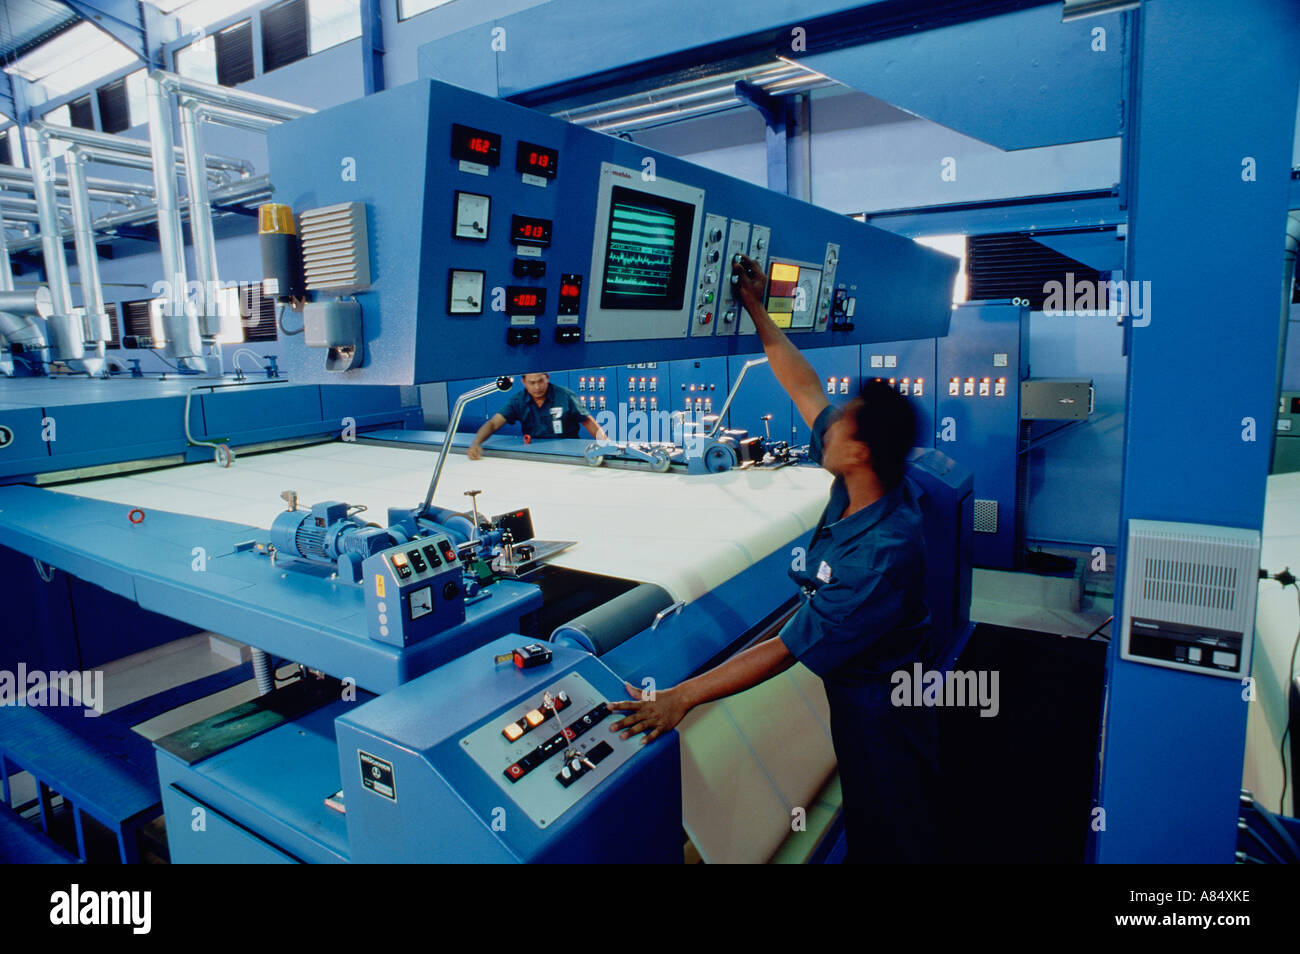 Indonesia. Manufacturing industry. Textiles factory worker machine operators. Stock Photo